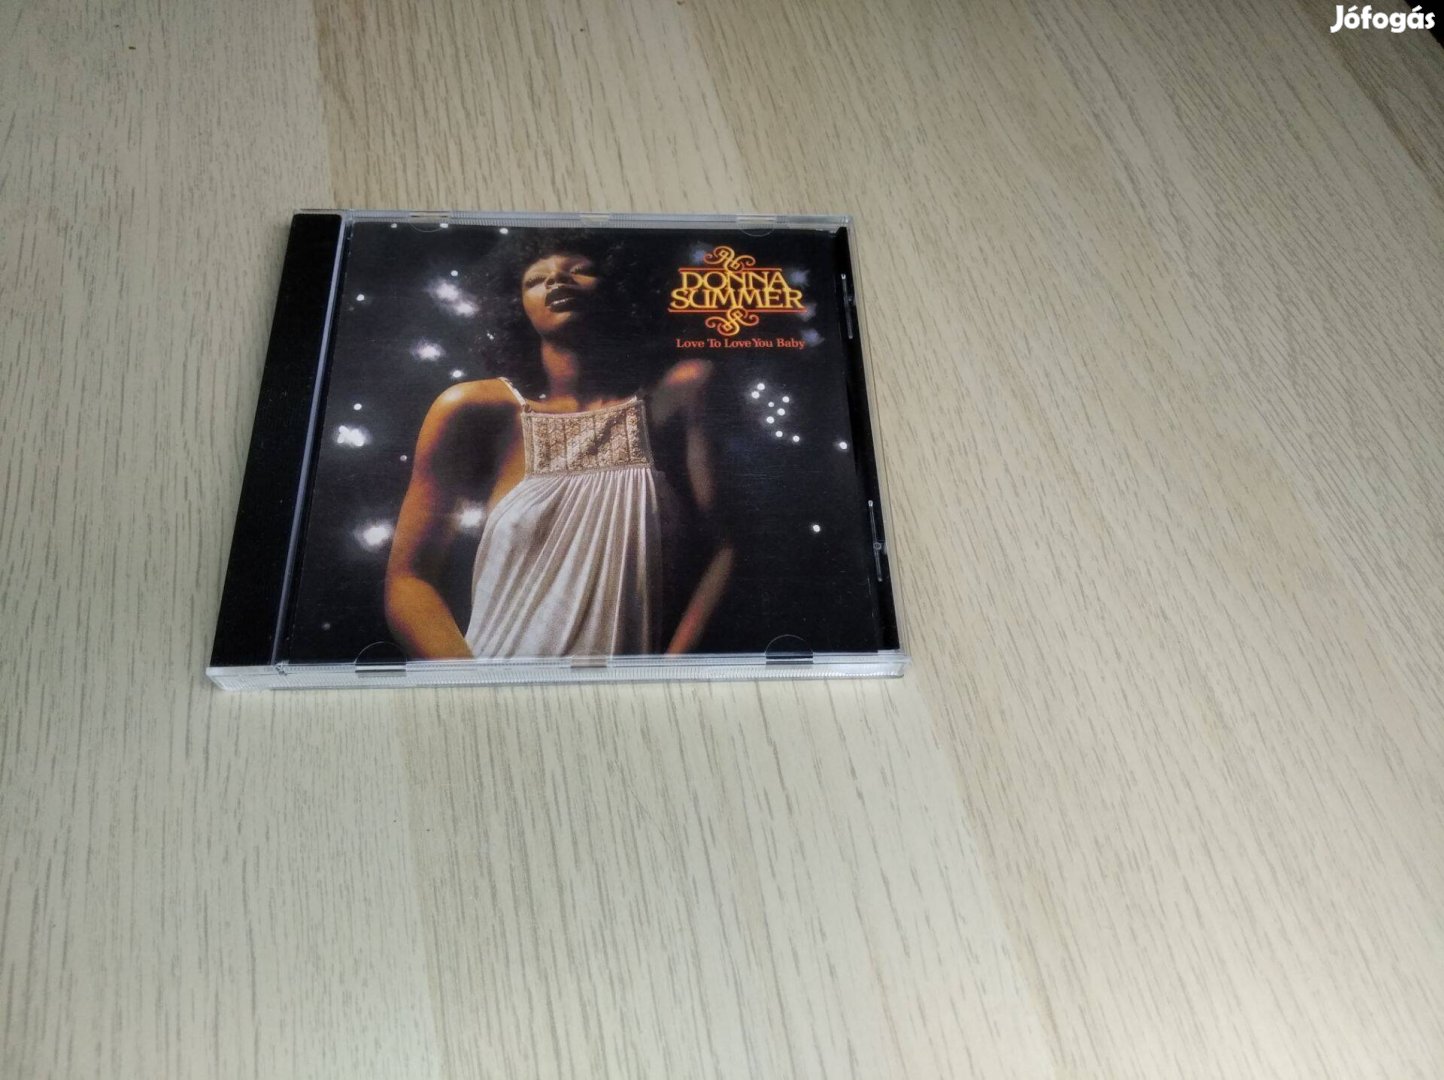 Donna Summer - Love To Love You Baby / CD